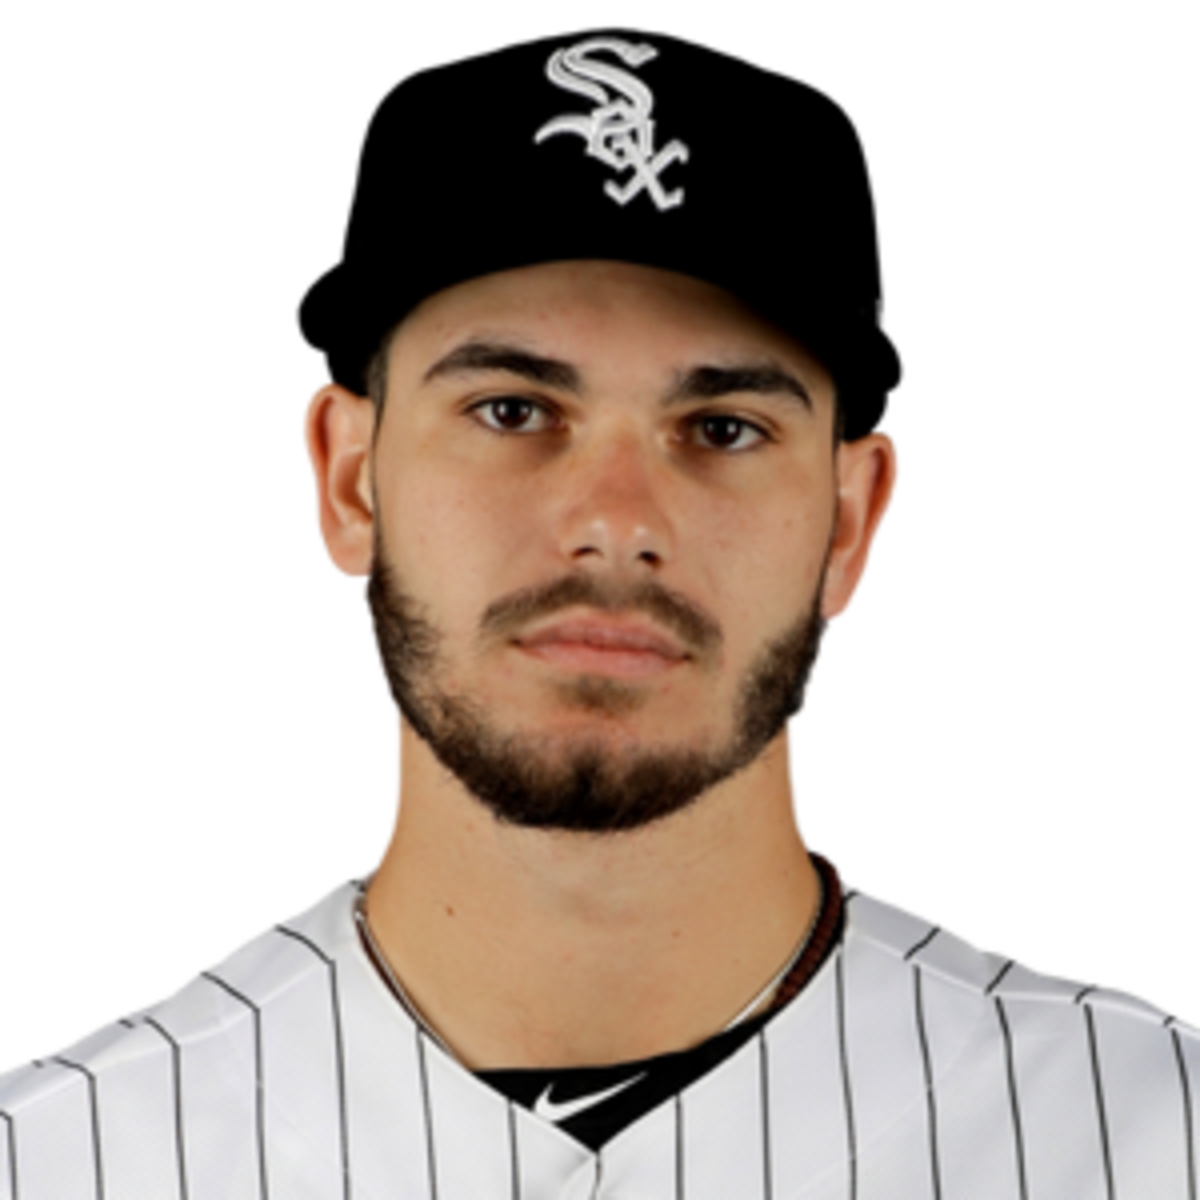 Dylan Cease Image, Picture #1231630 Online